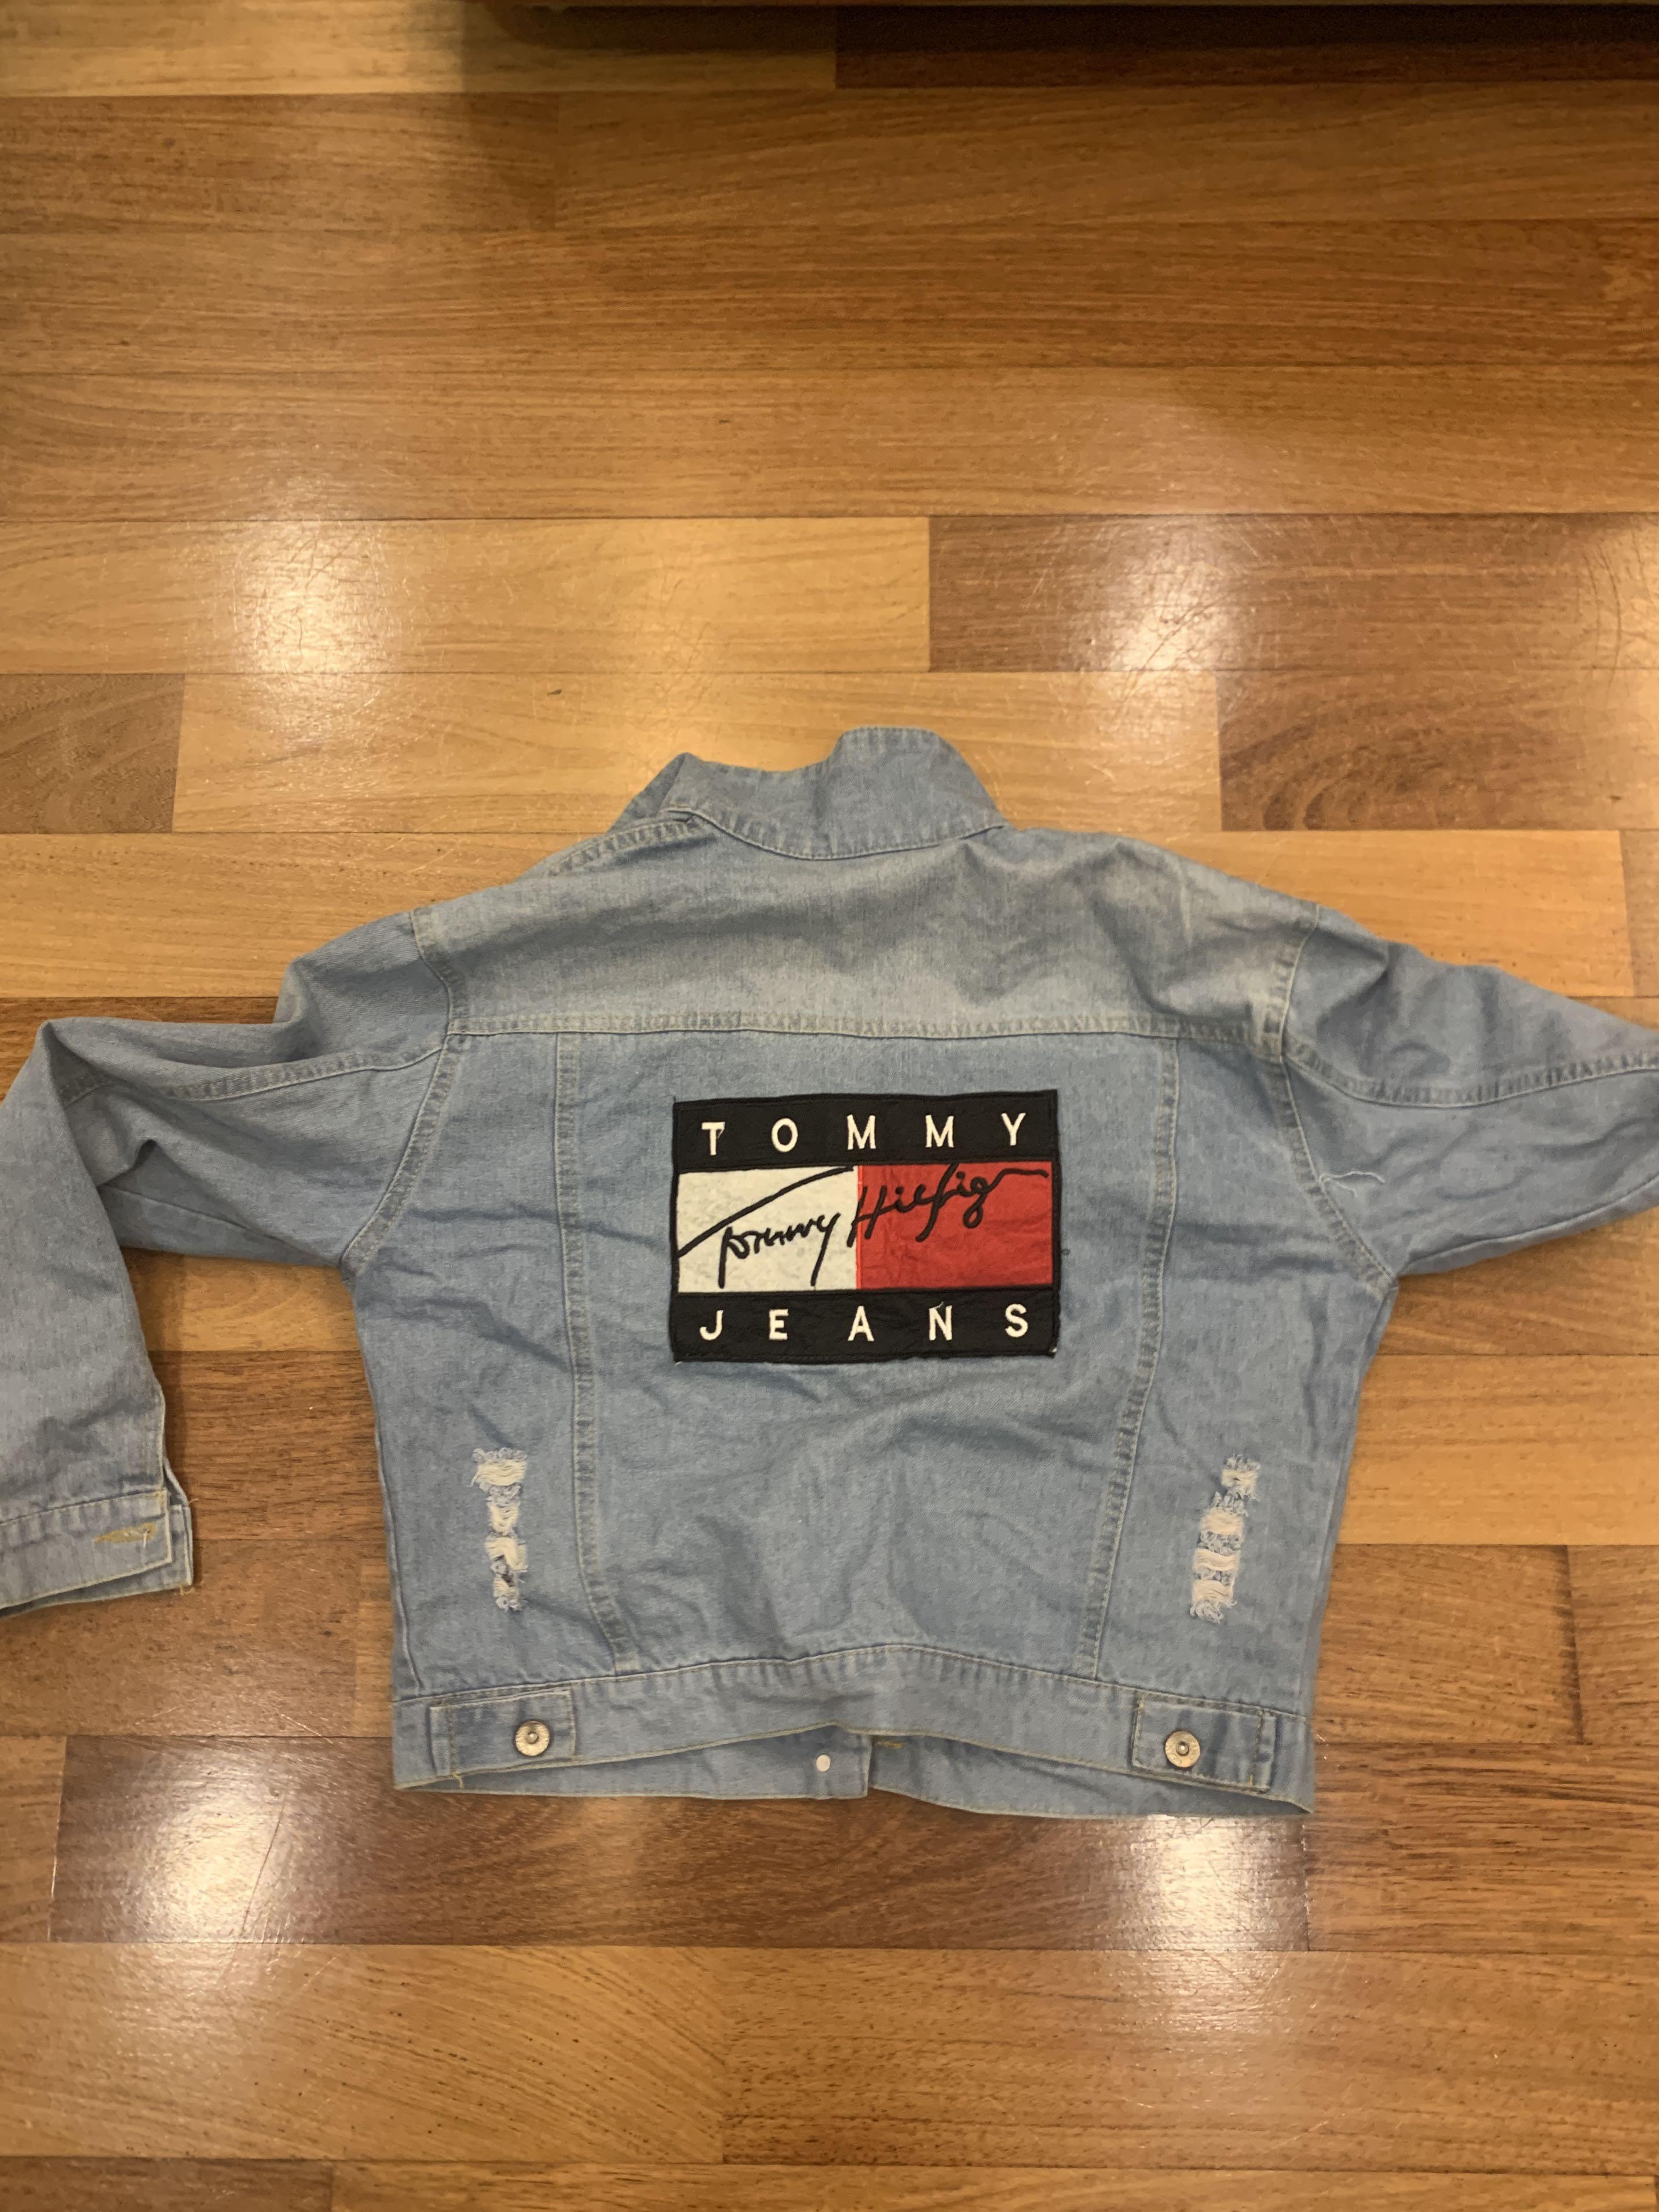 Politistation Overskyet taske TOMMY HILFIGER REPLICA JEAN JACKET, Women's Fashion, Coats, Jackets and  Outerwear on Carousell